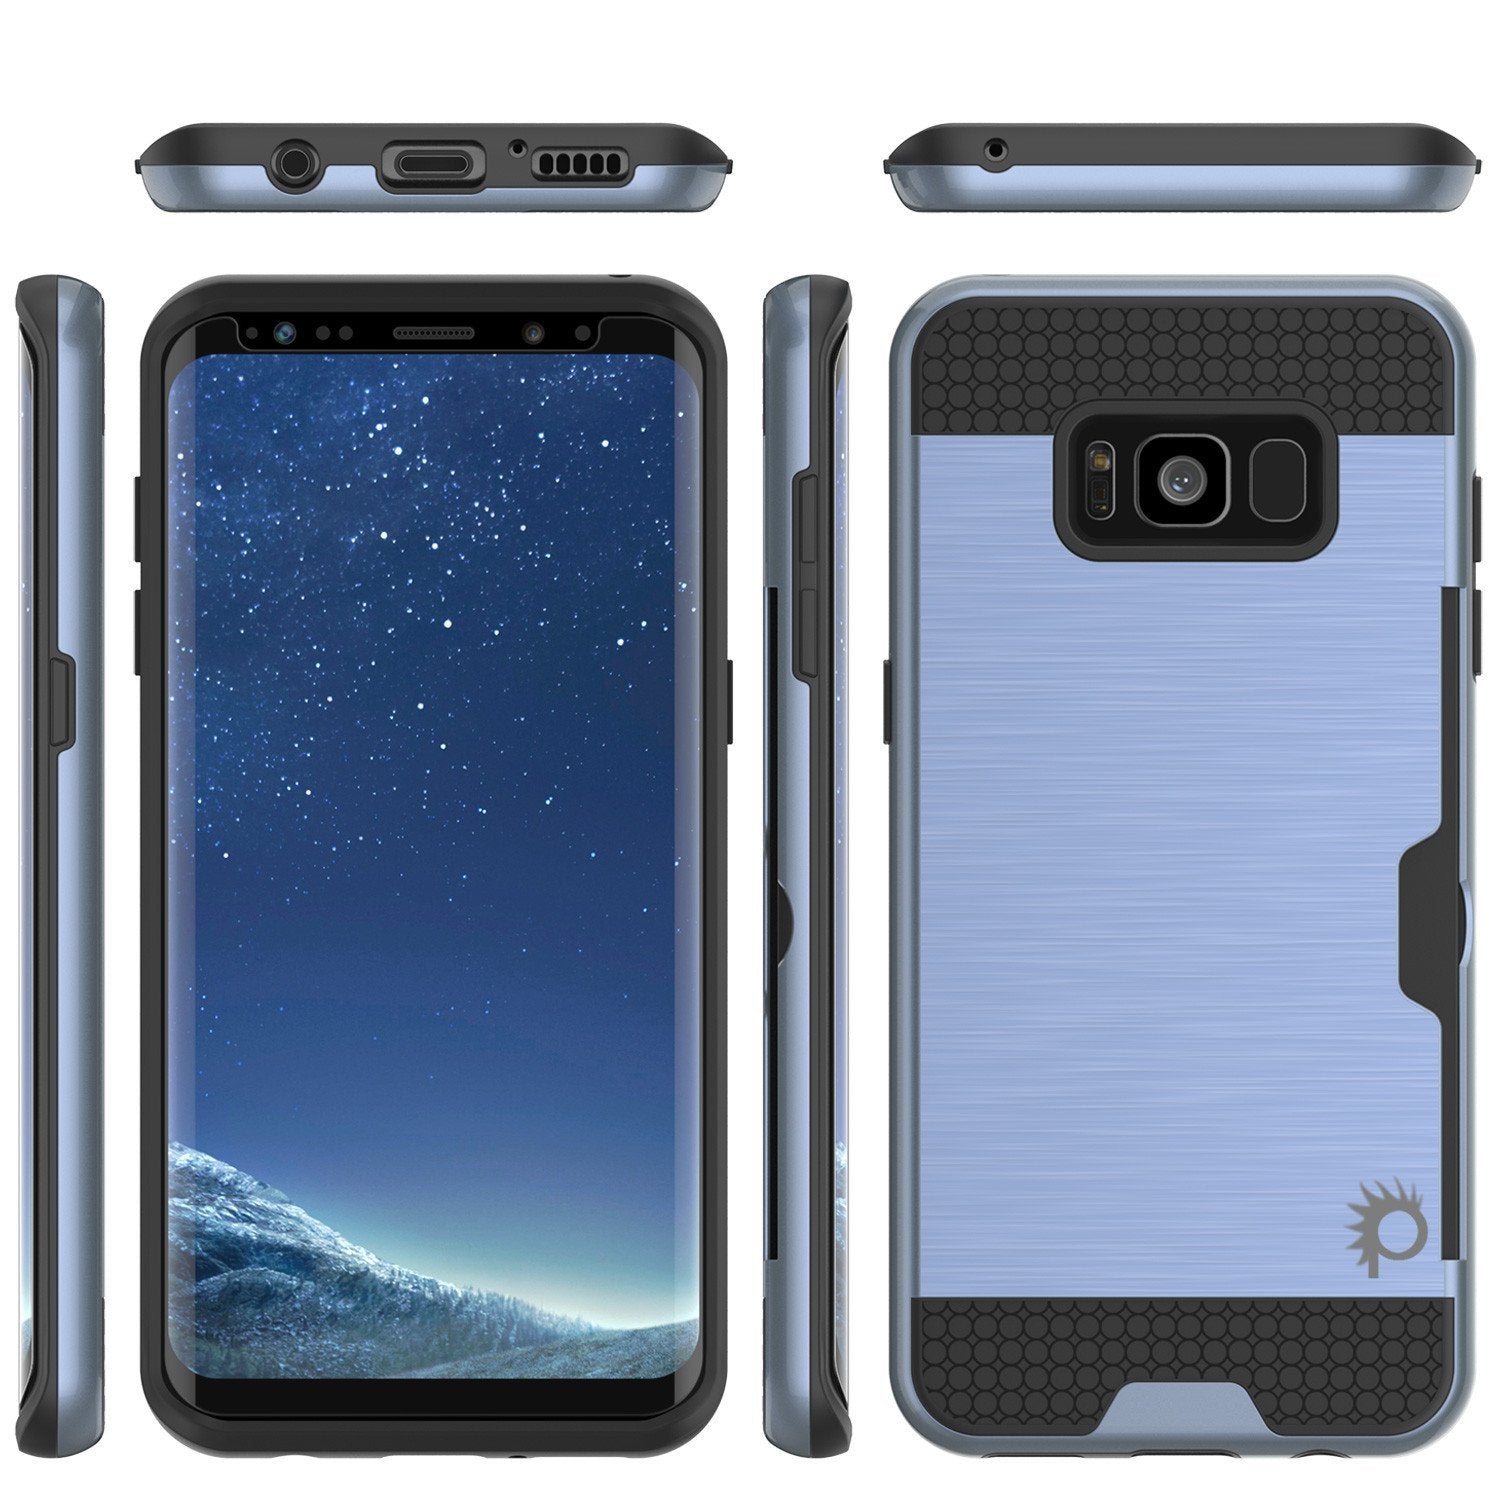 Galaxy S8 Case, PUNKcase [SLOT Series] Dual-Layer Armor Cover w/Integrated Anti-Shock System, Credit Card Slot & Screen Protector [Navy]